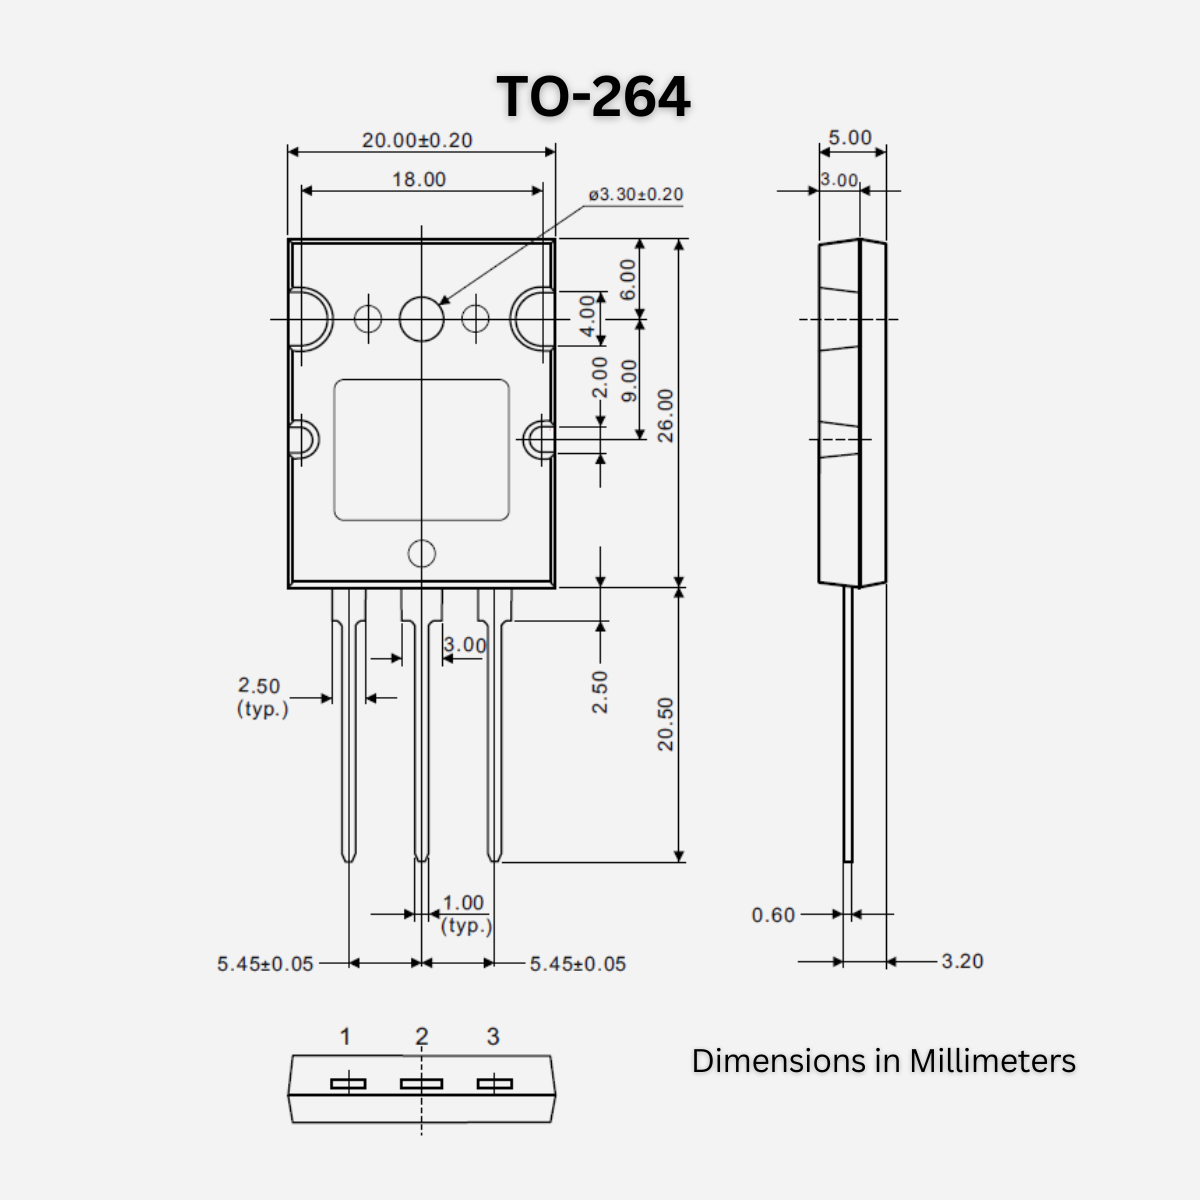 TO-264 package dimentions of 2SC5200